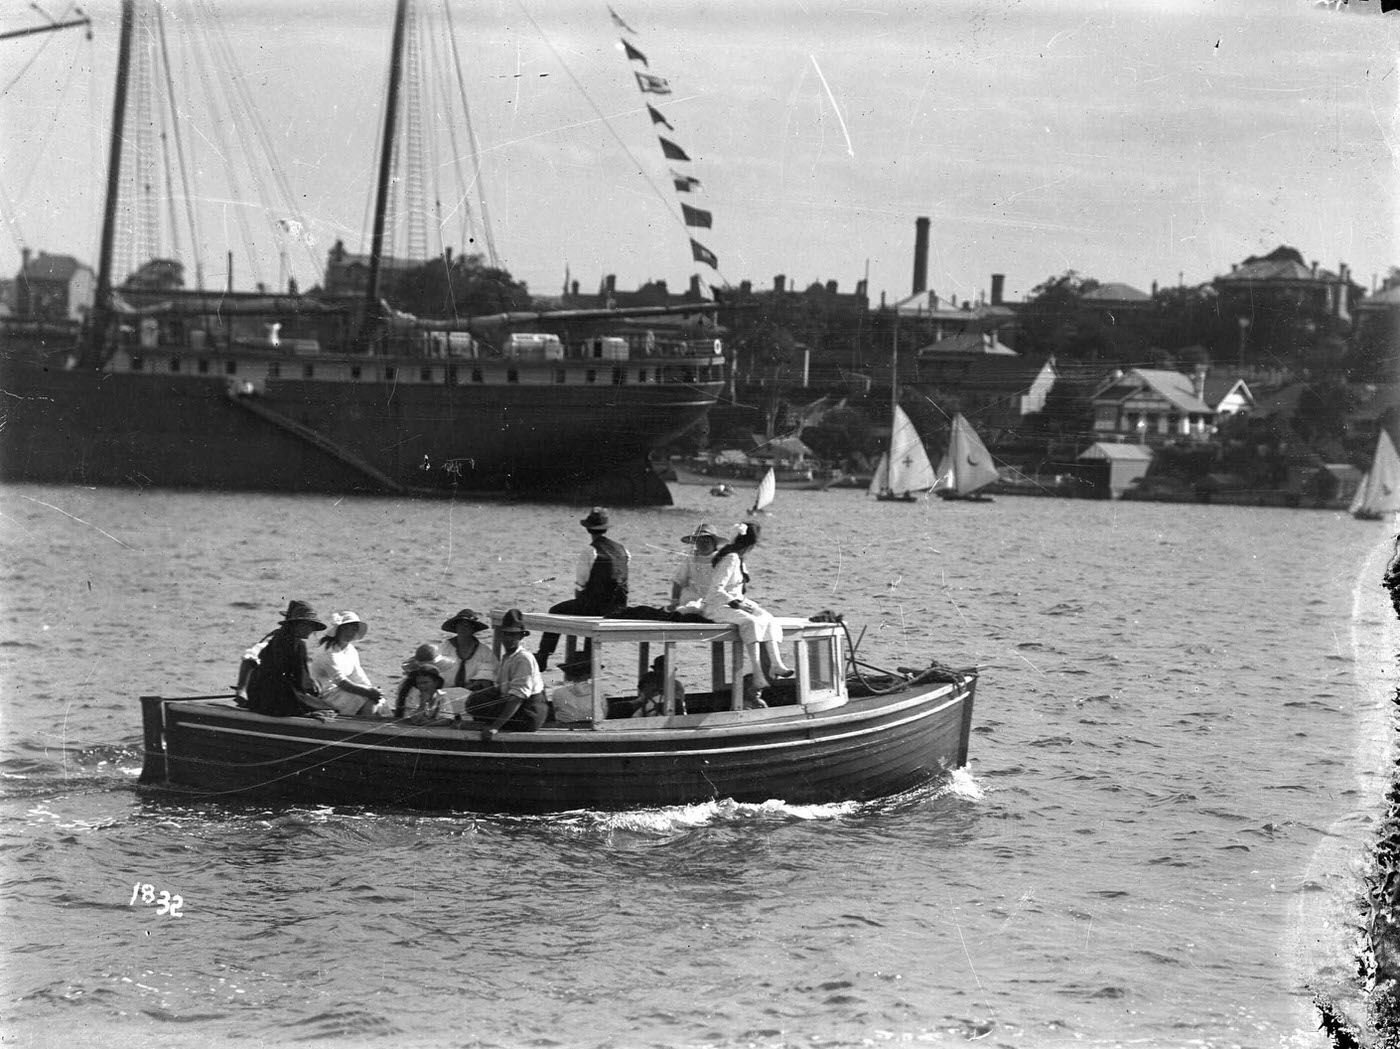 Motor launch carrying a group of spectators on Sydney Harbour